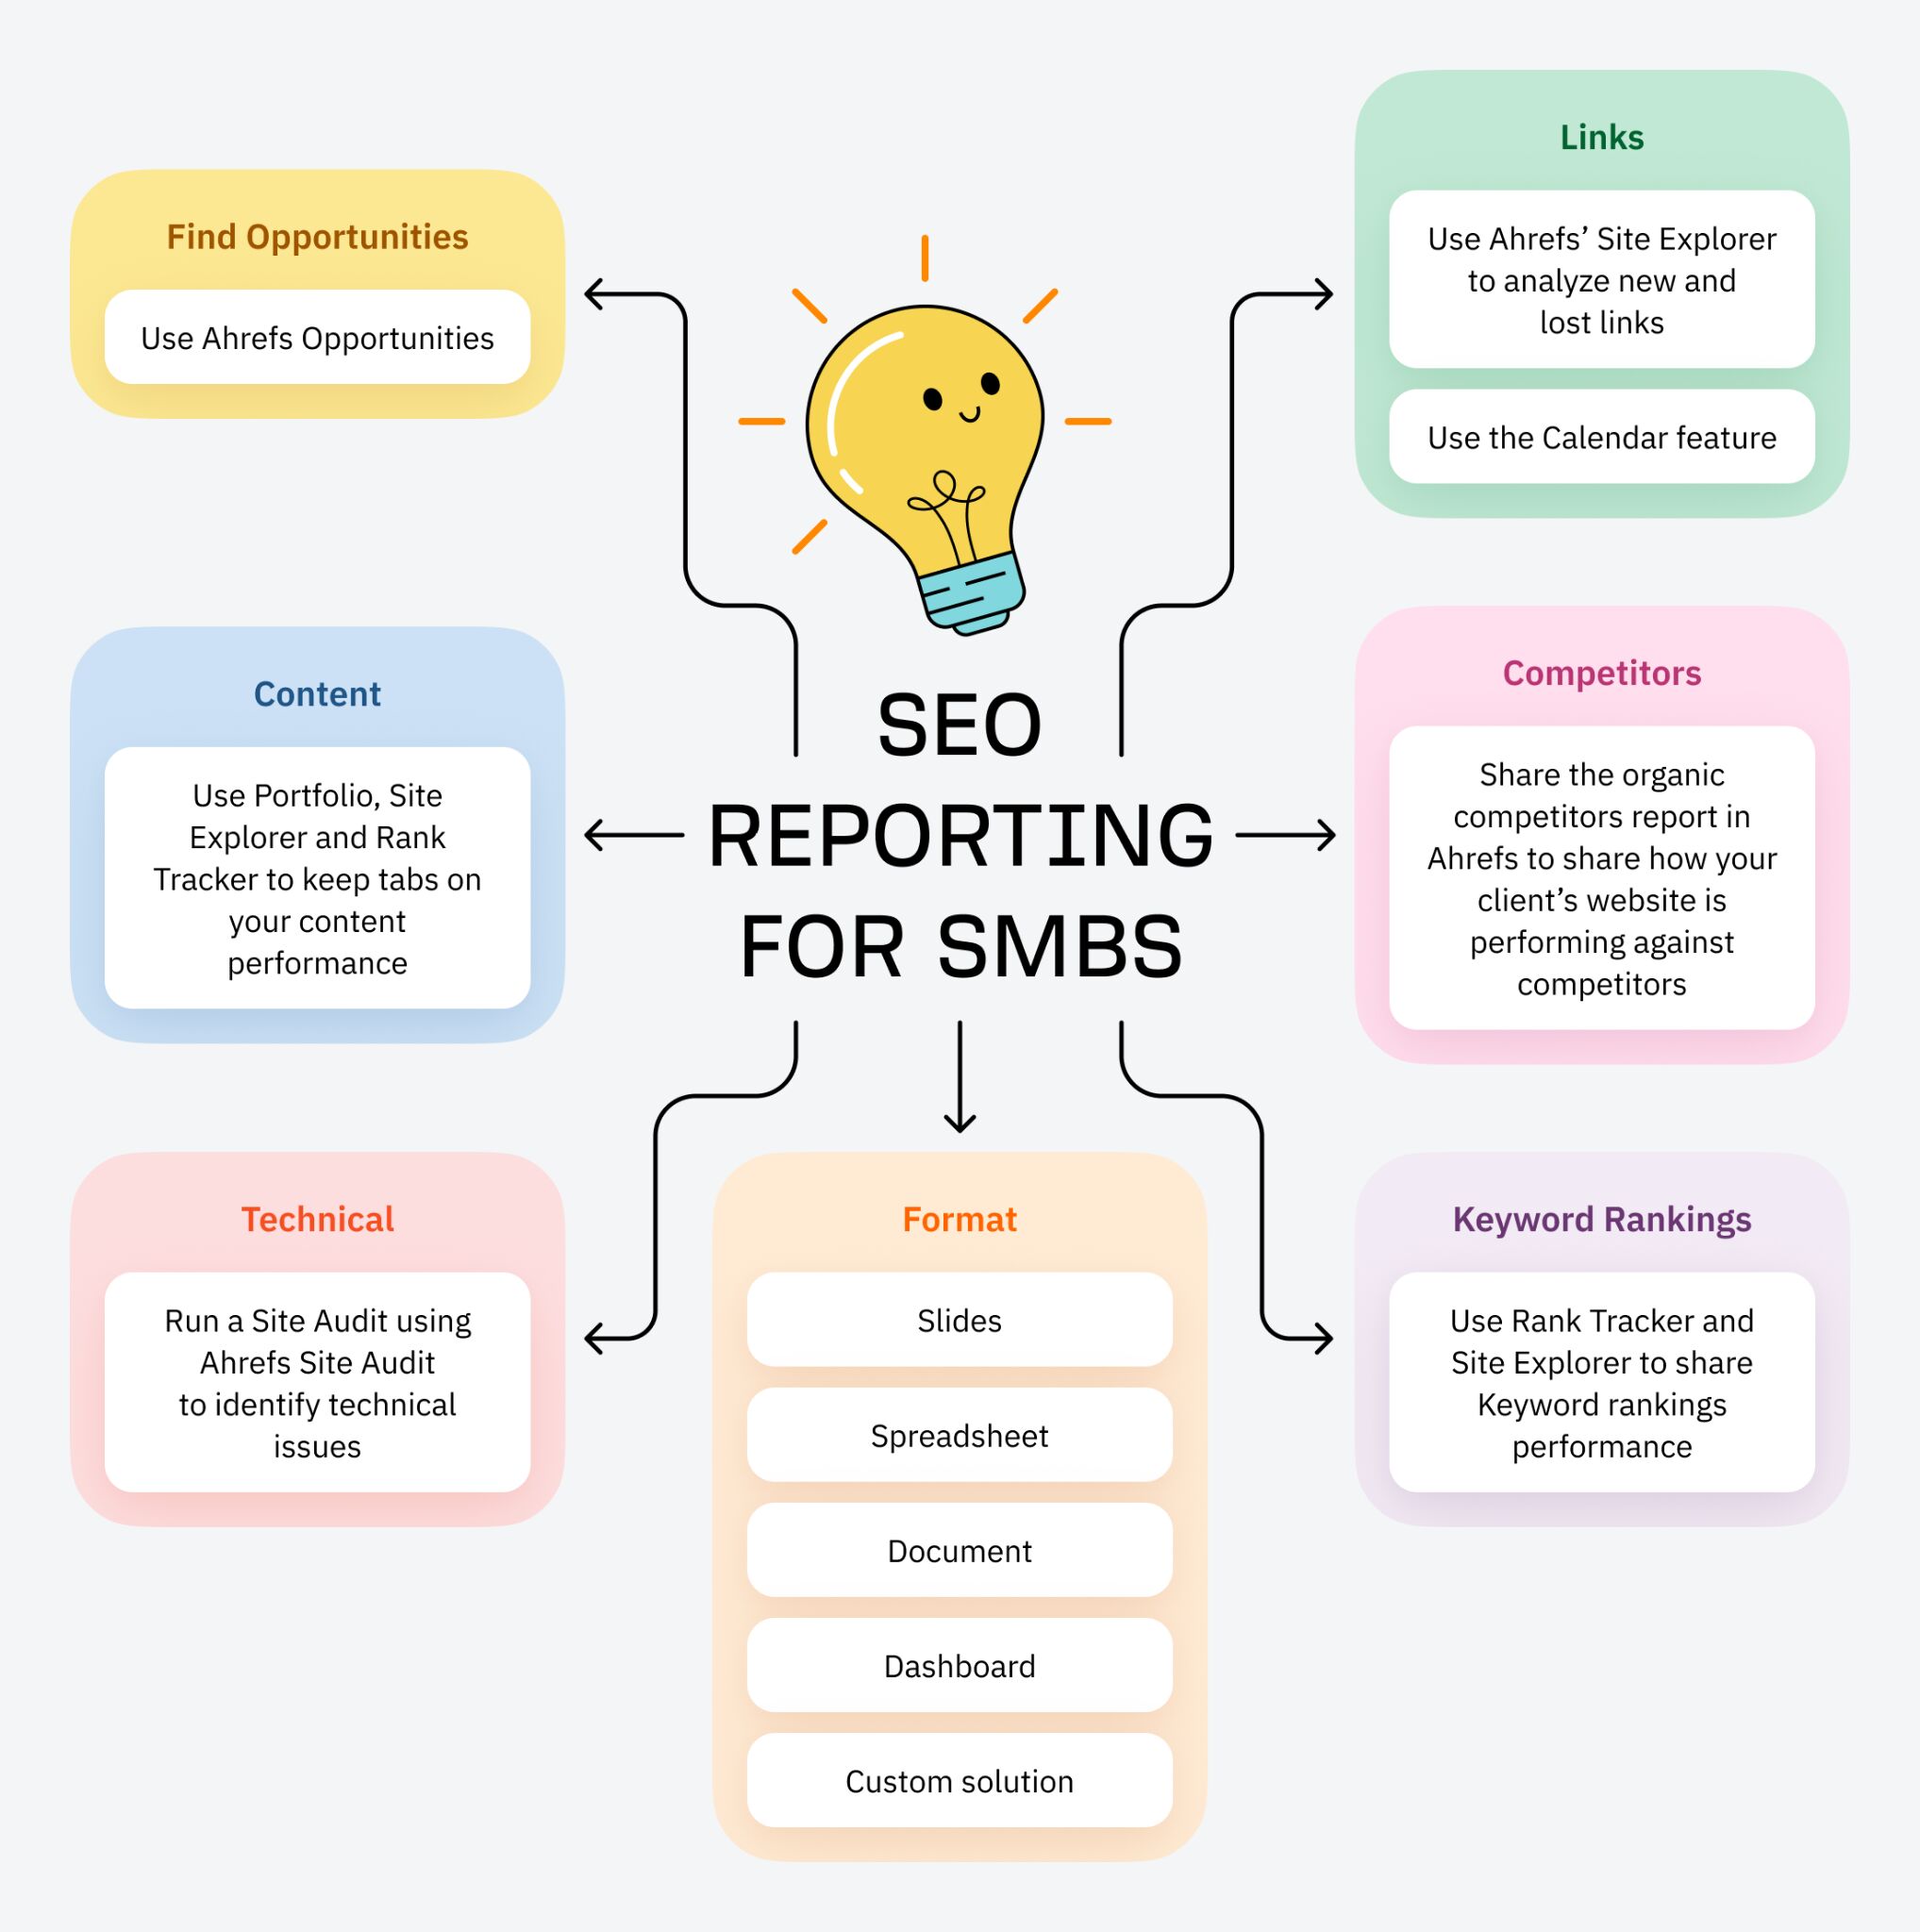 SEO reporting for SMBs illustration